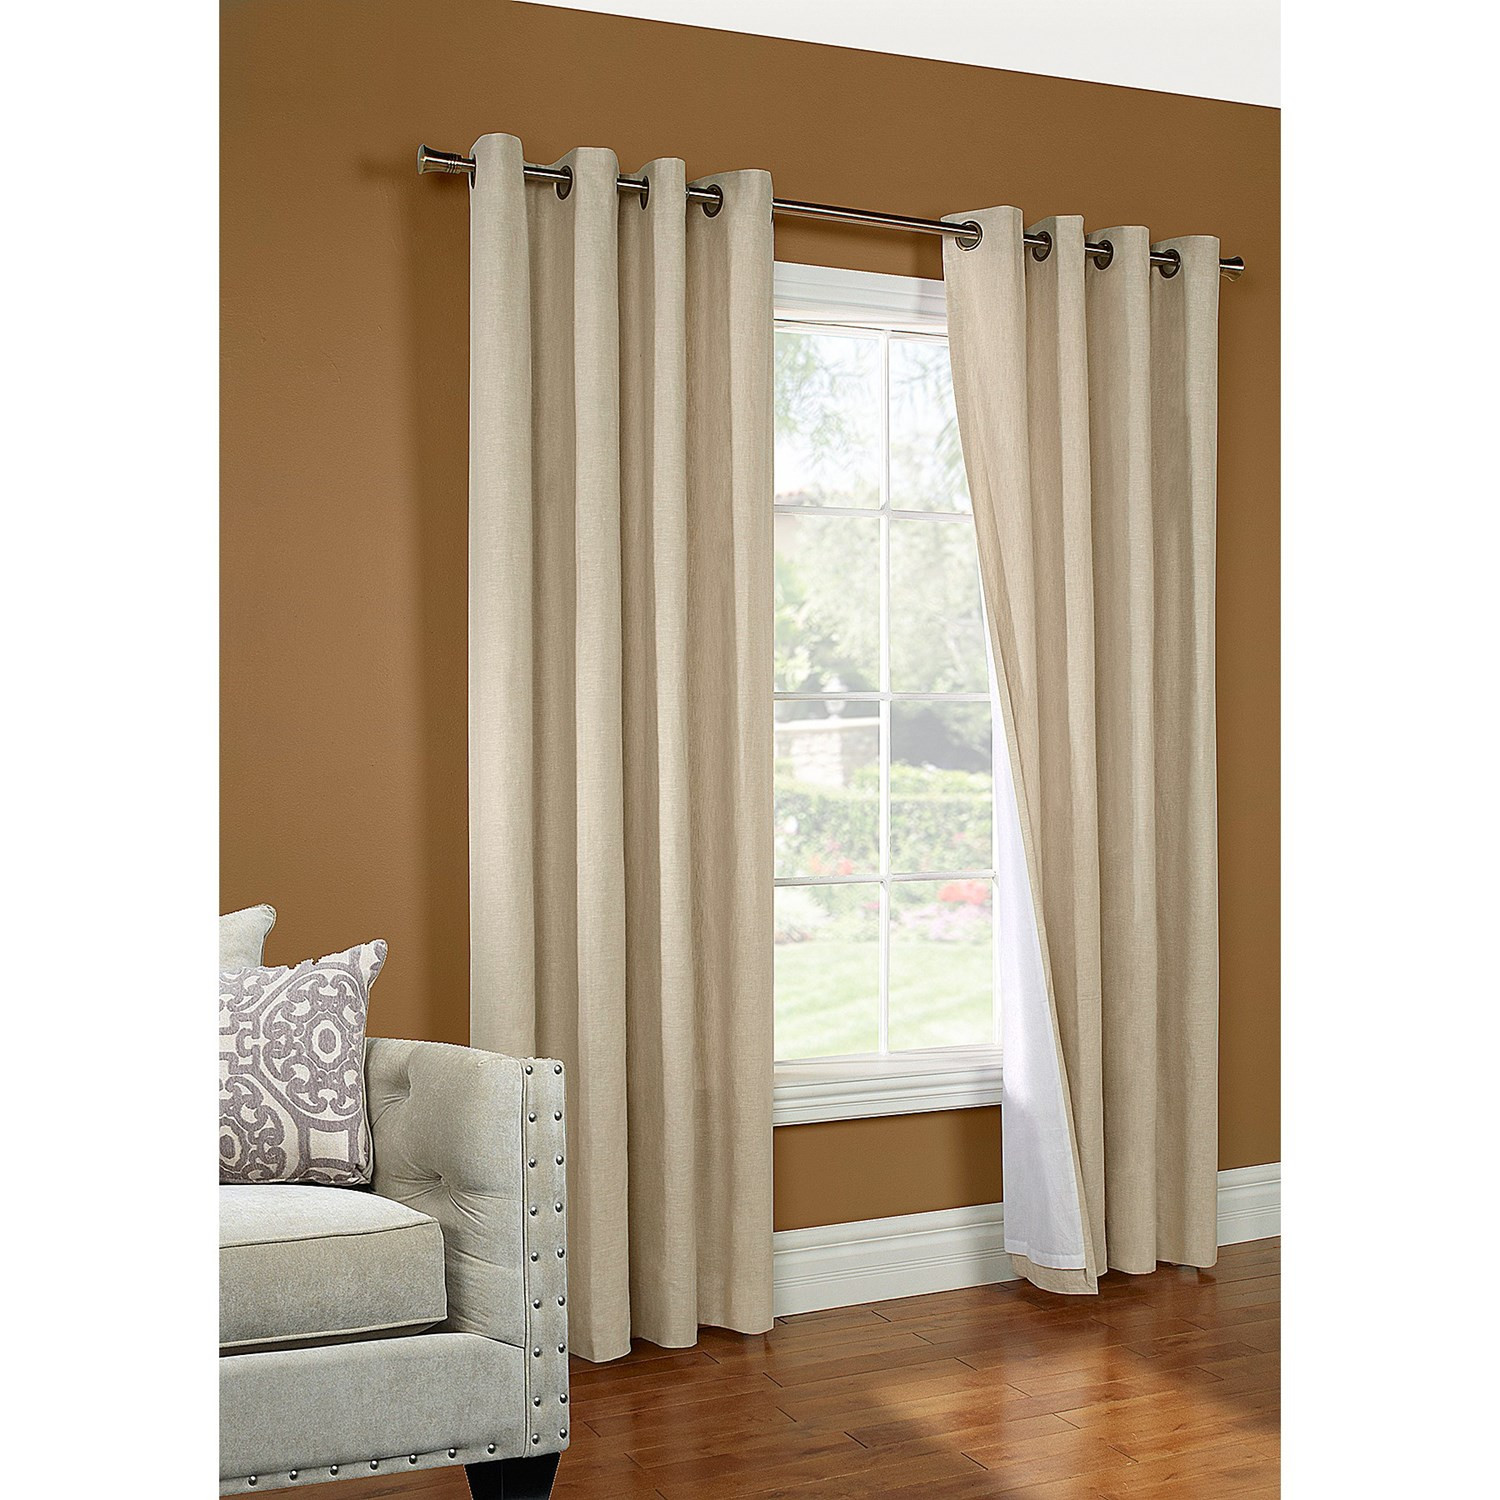 Macys Kitchen Curtains
 Decor Enchanting Jcpenney Kitchen Curtains For Your Sweet